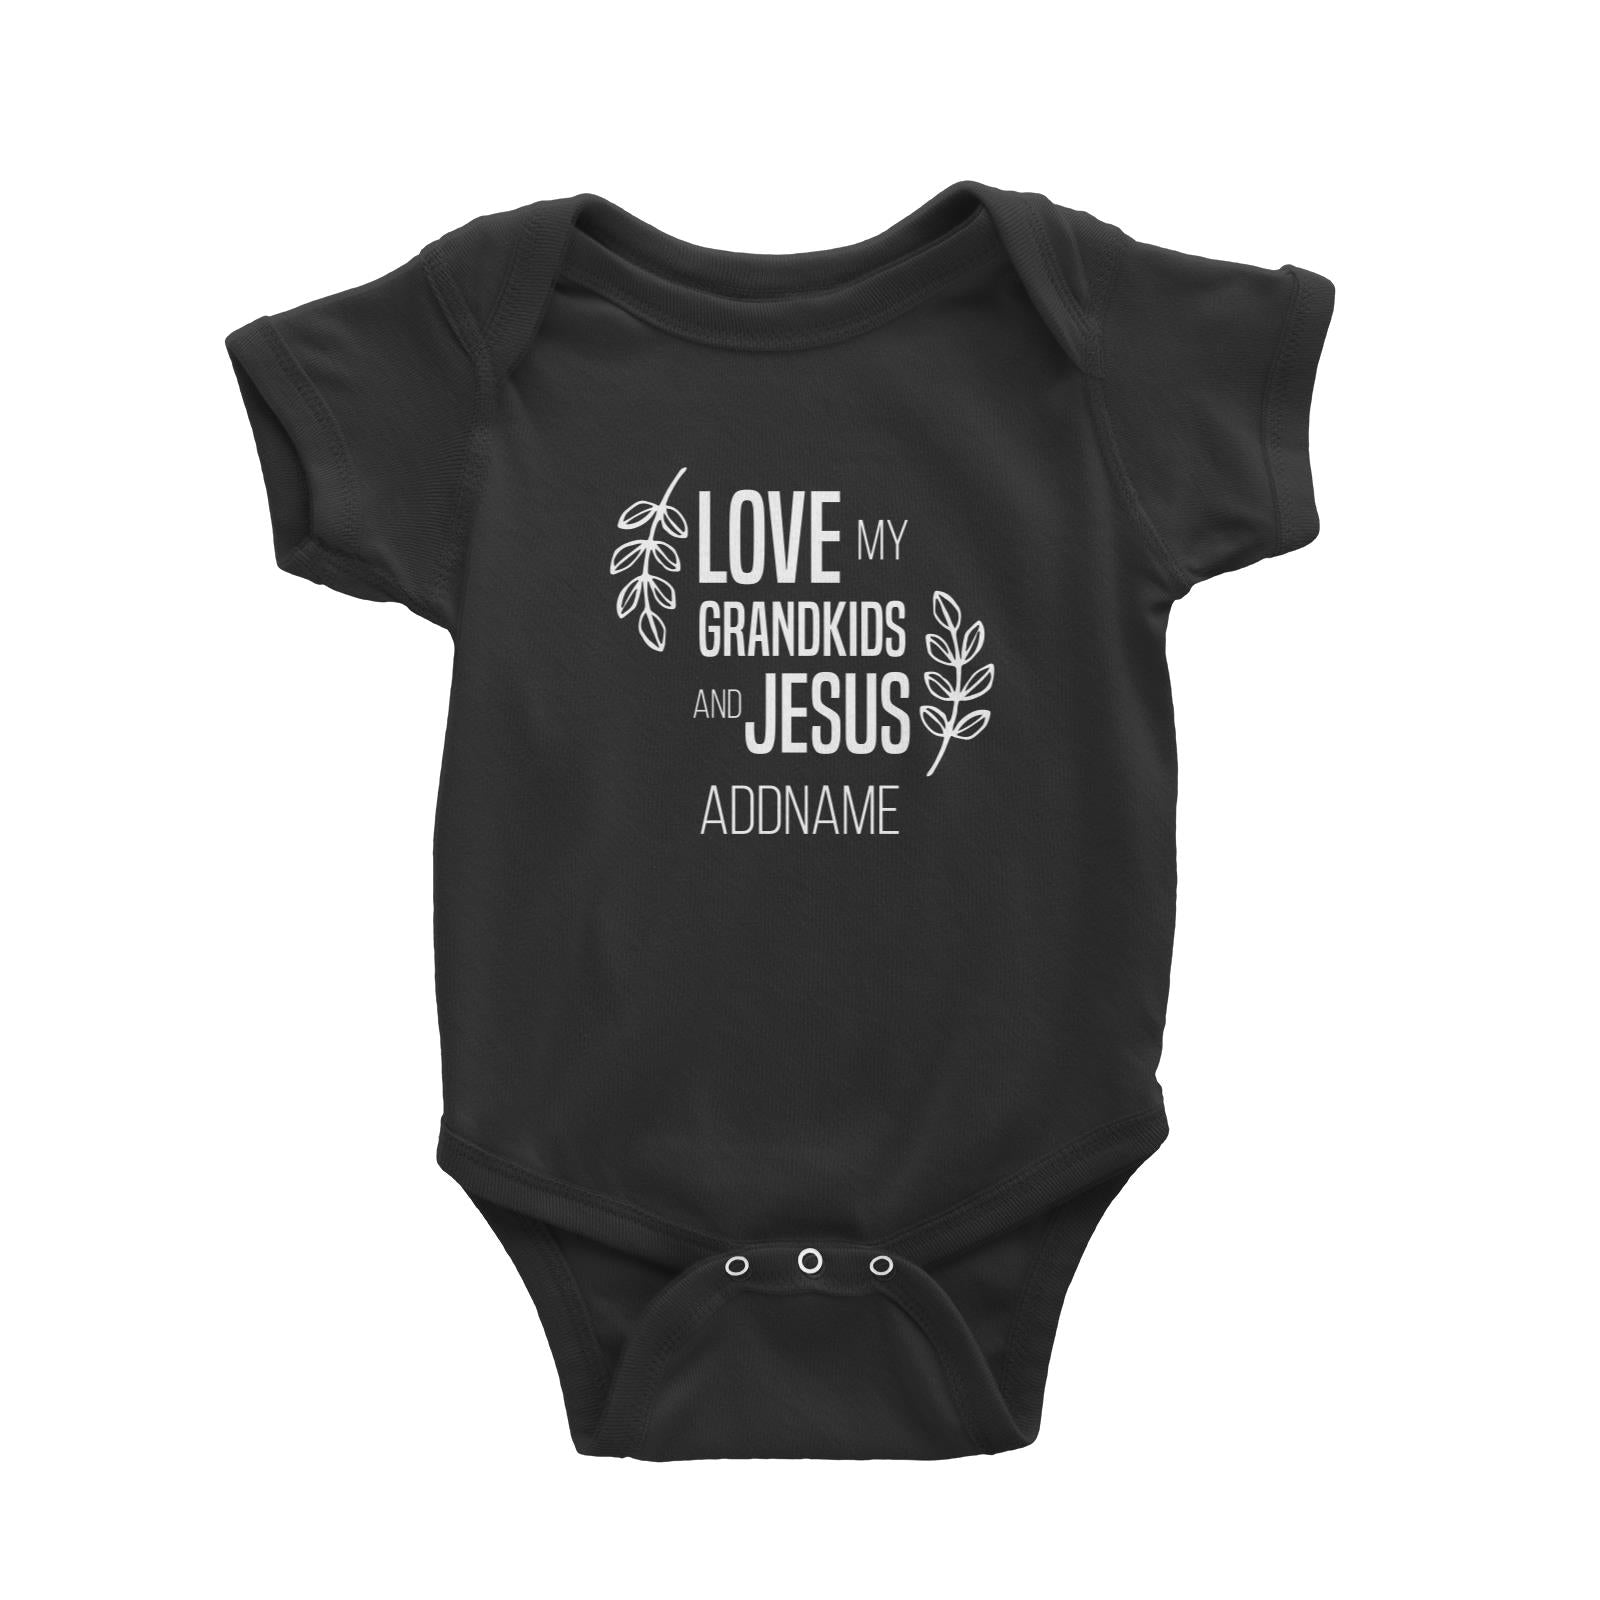 Christian Series Love My Grandkids And Jesus Addname Baby Romper